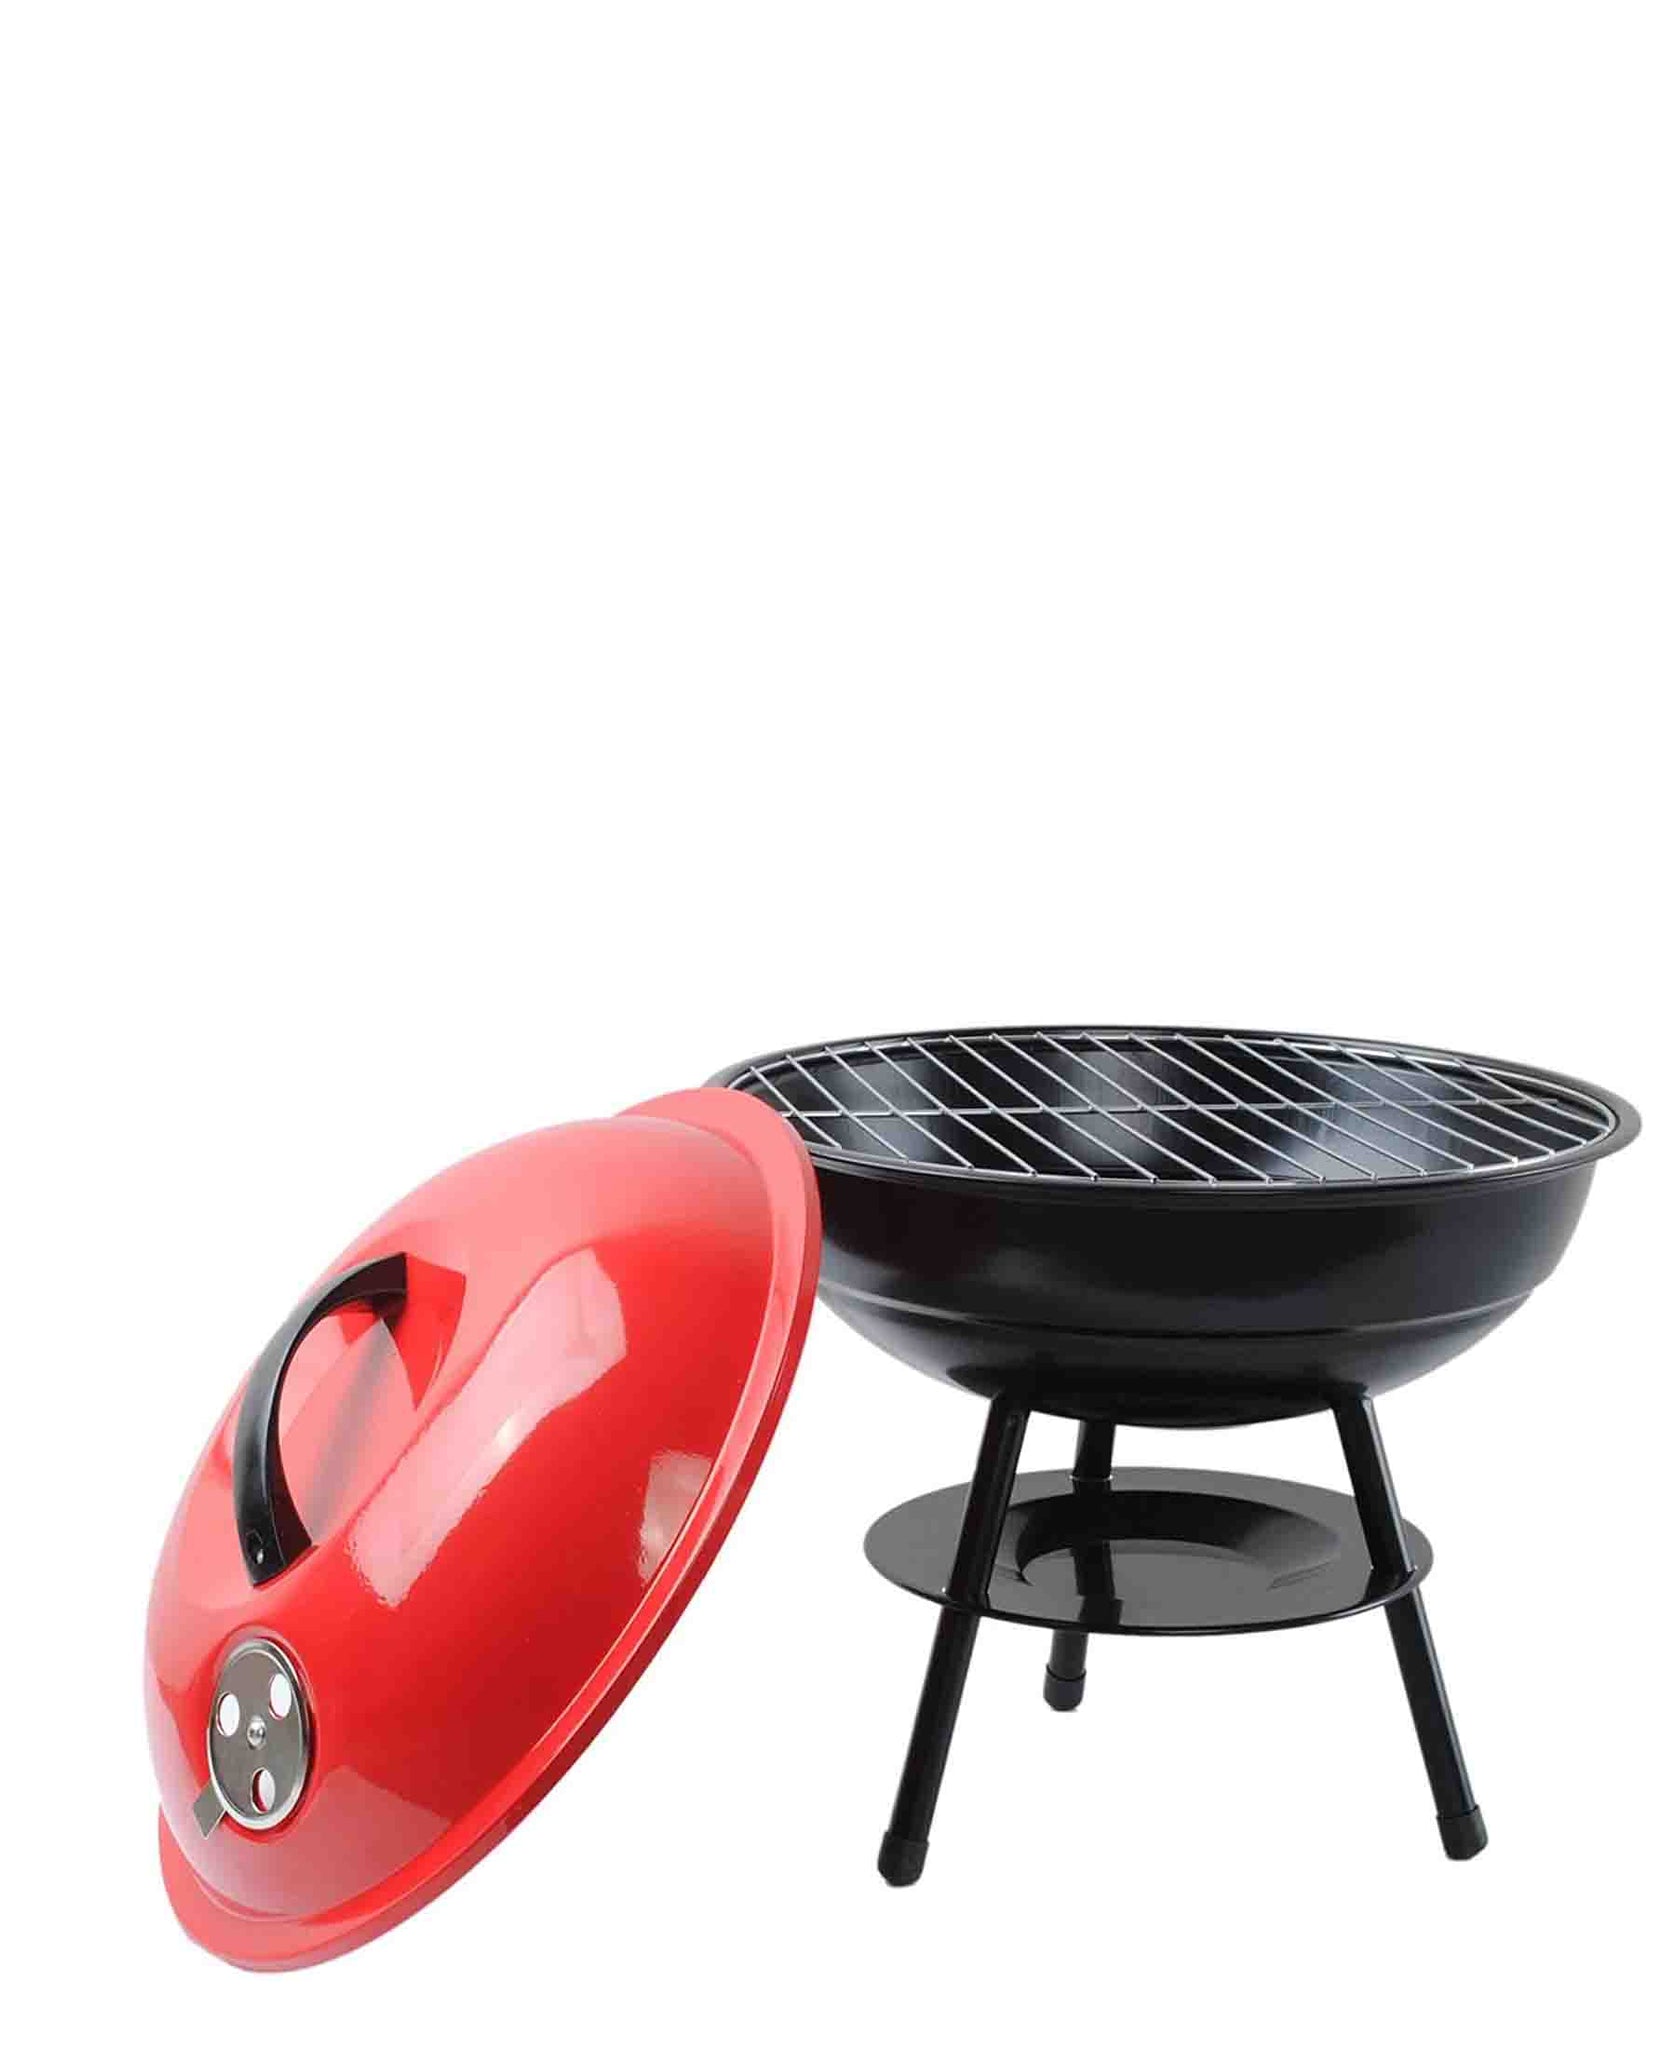 Kitchen Life Portable Charcoal Barbecue  - Red & Black